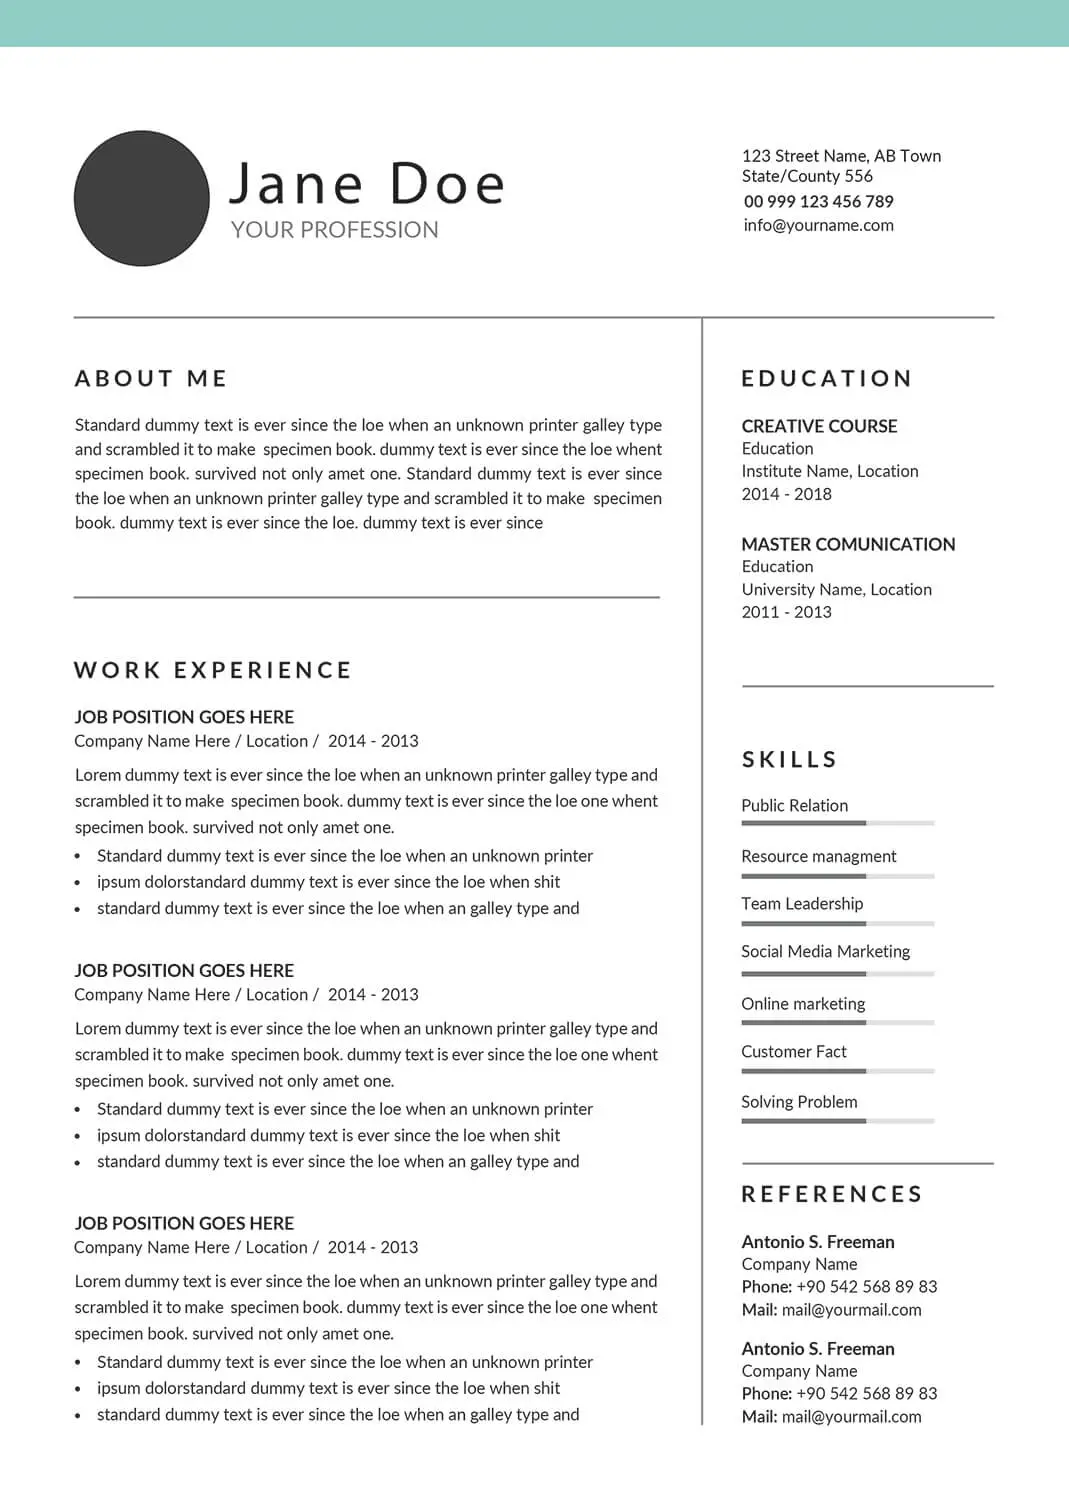 Engineering Manager Resume Templates